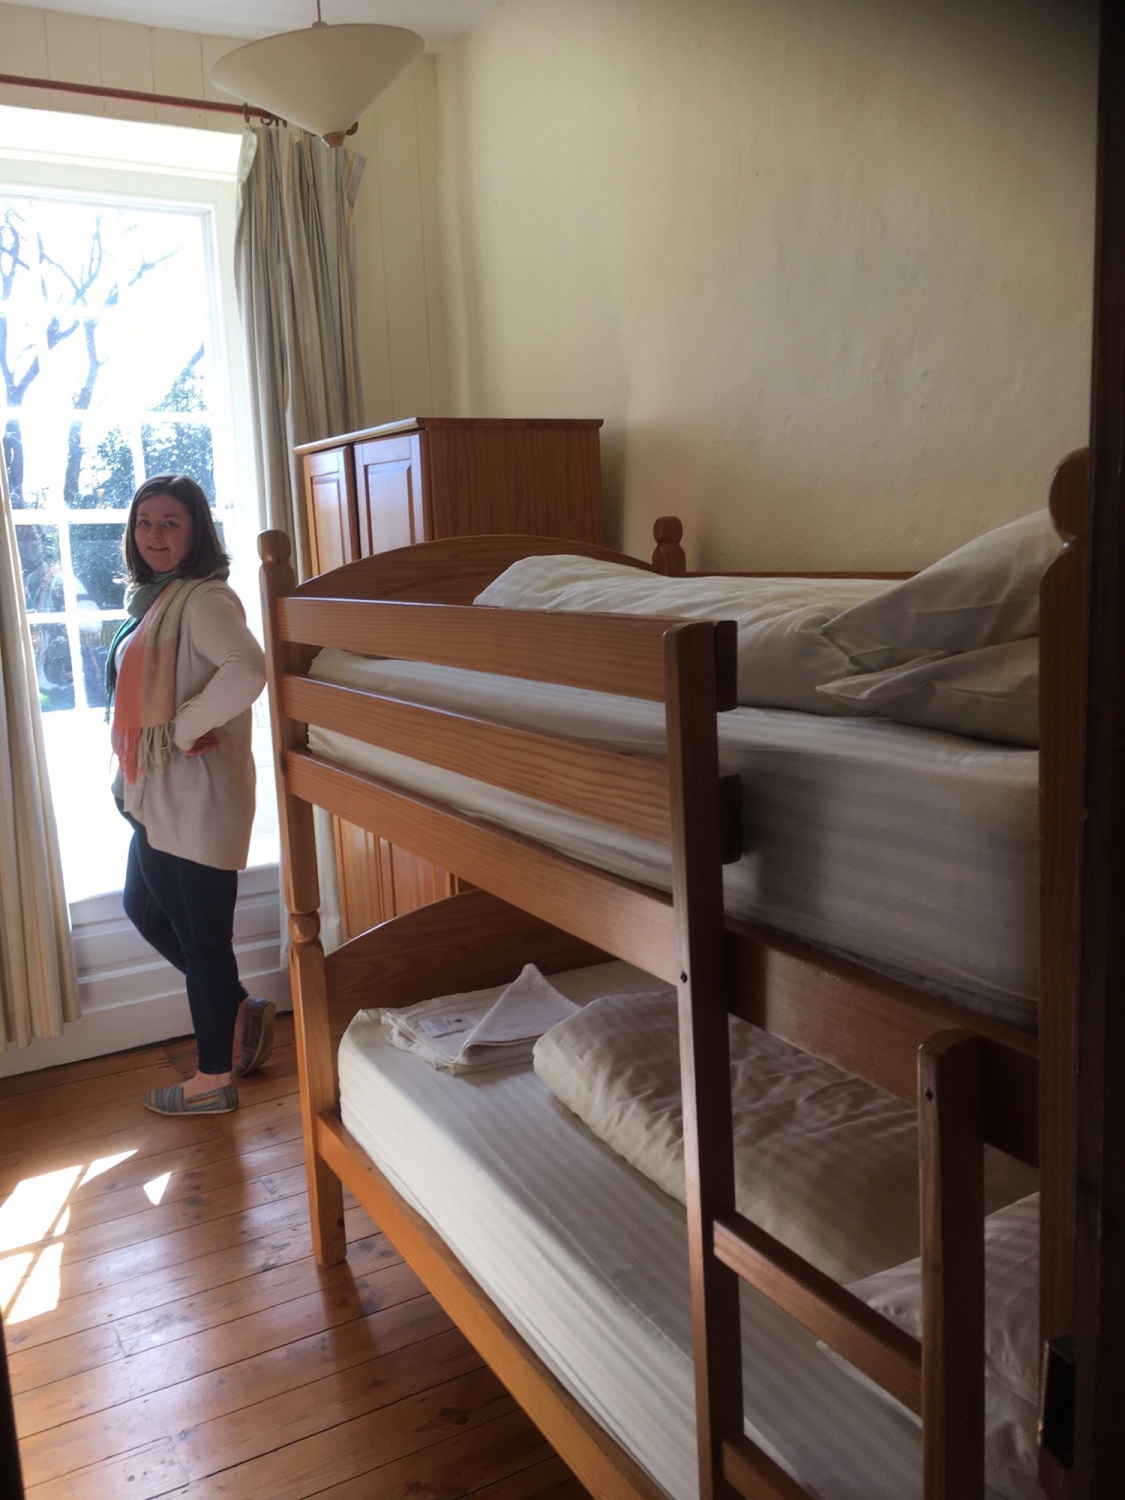 Room With Bunk Beds, Small Single Bunk Beds